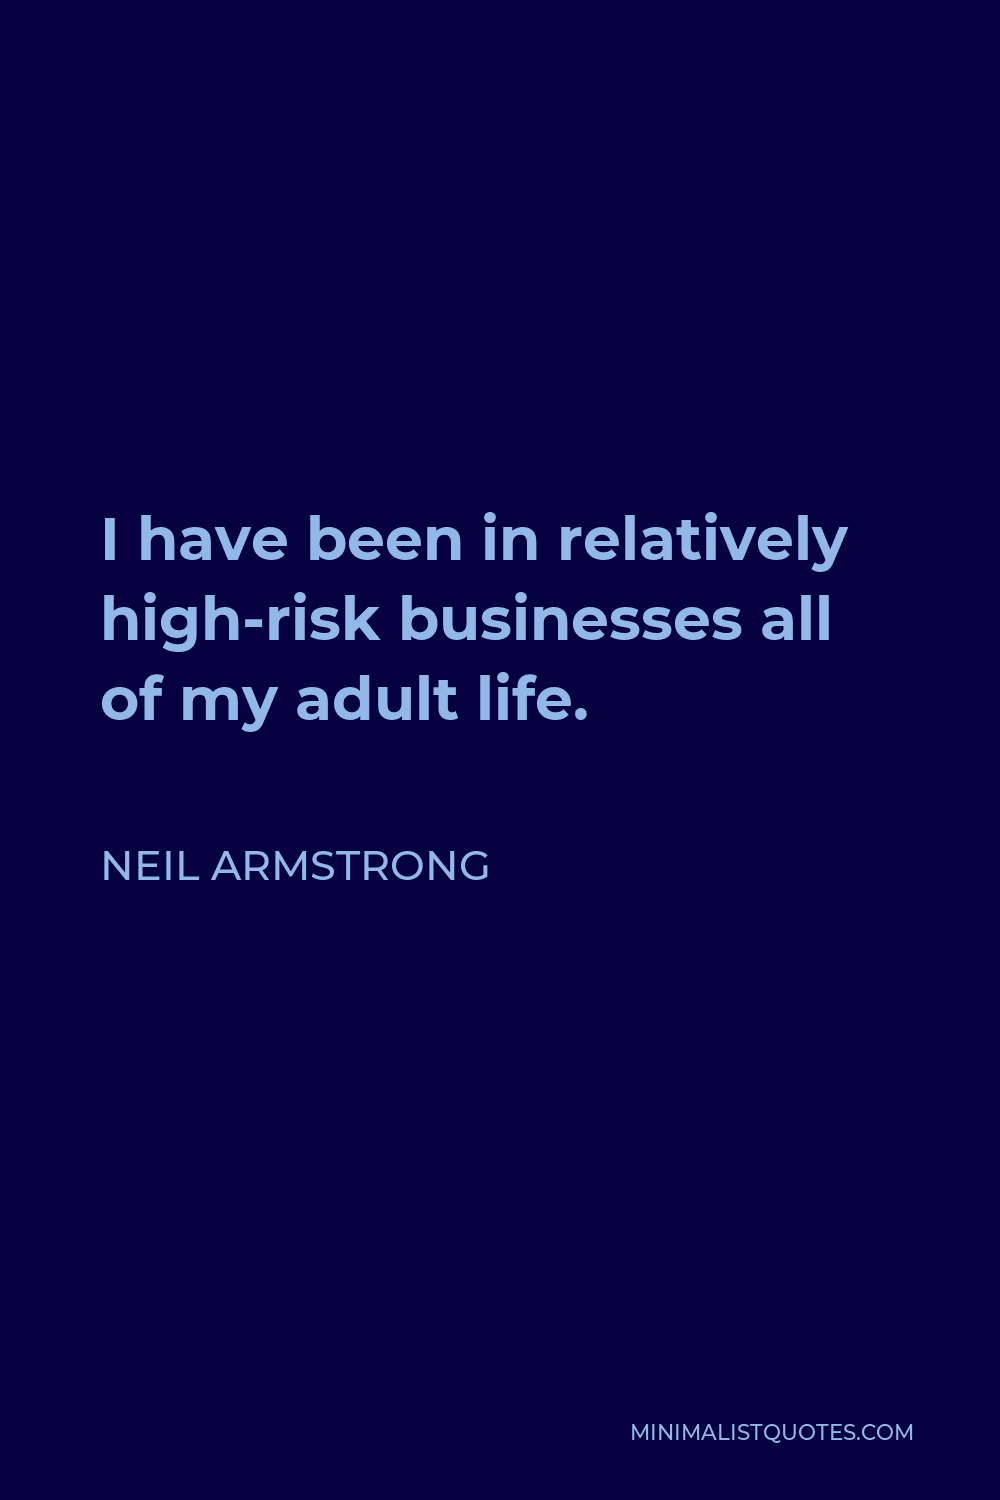 Neil Armstrong Quote - I have been in relatively high-risk businesses all of my adult life.